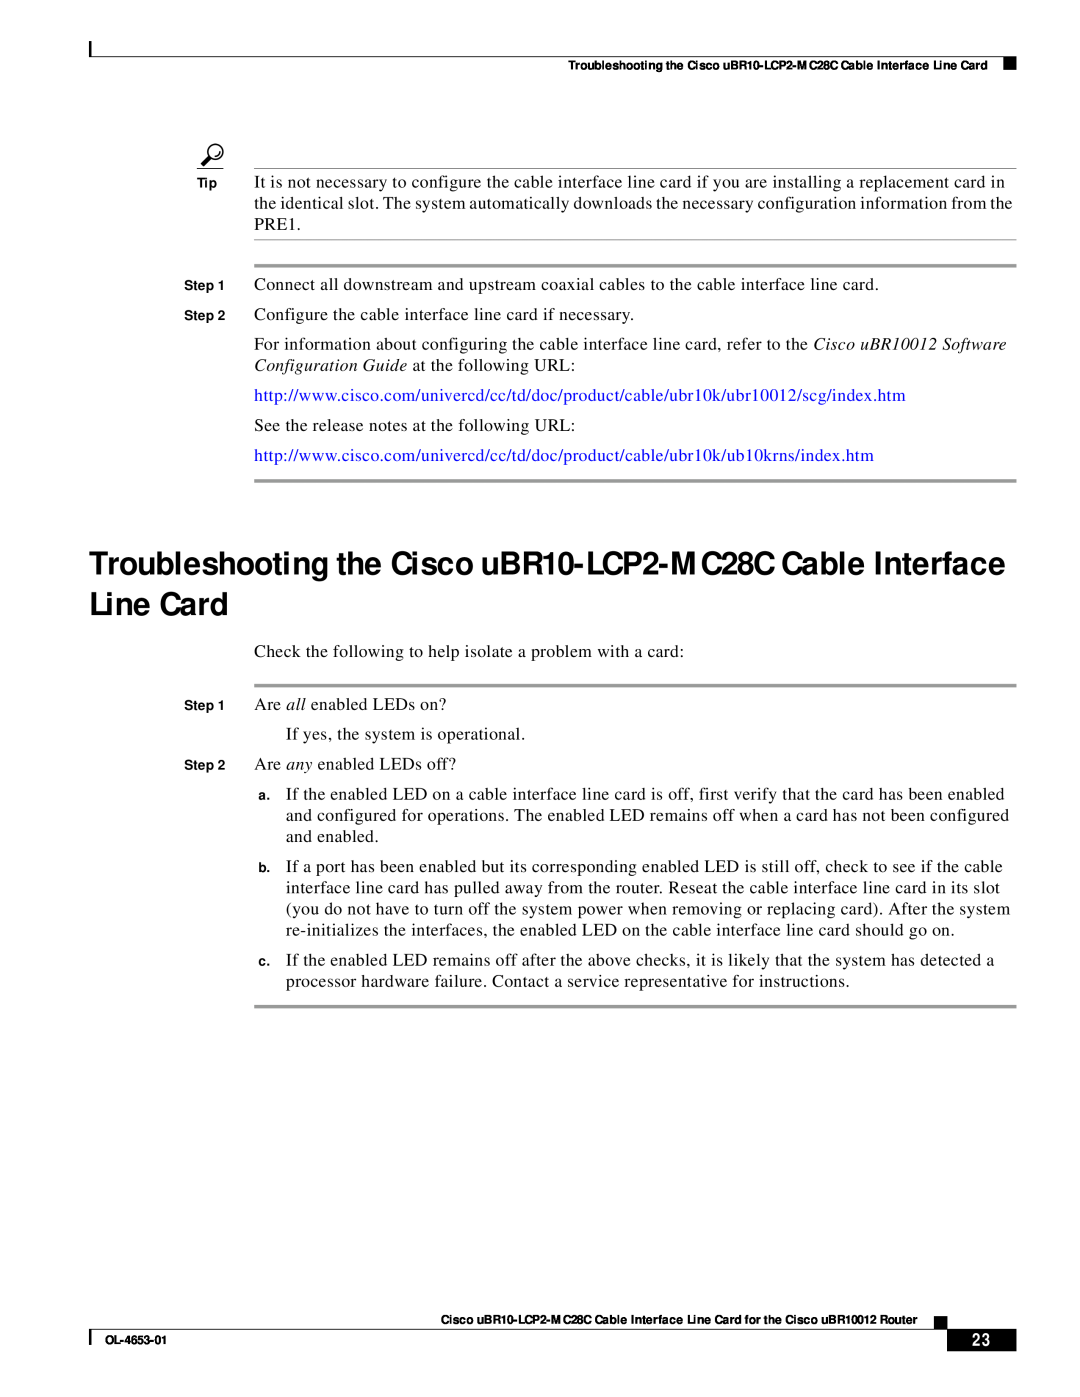 Cisco Systems manual Troubleshooting the Cisco uBR10-LCP2-MC28C Cable Interface Line Card 